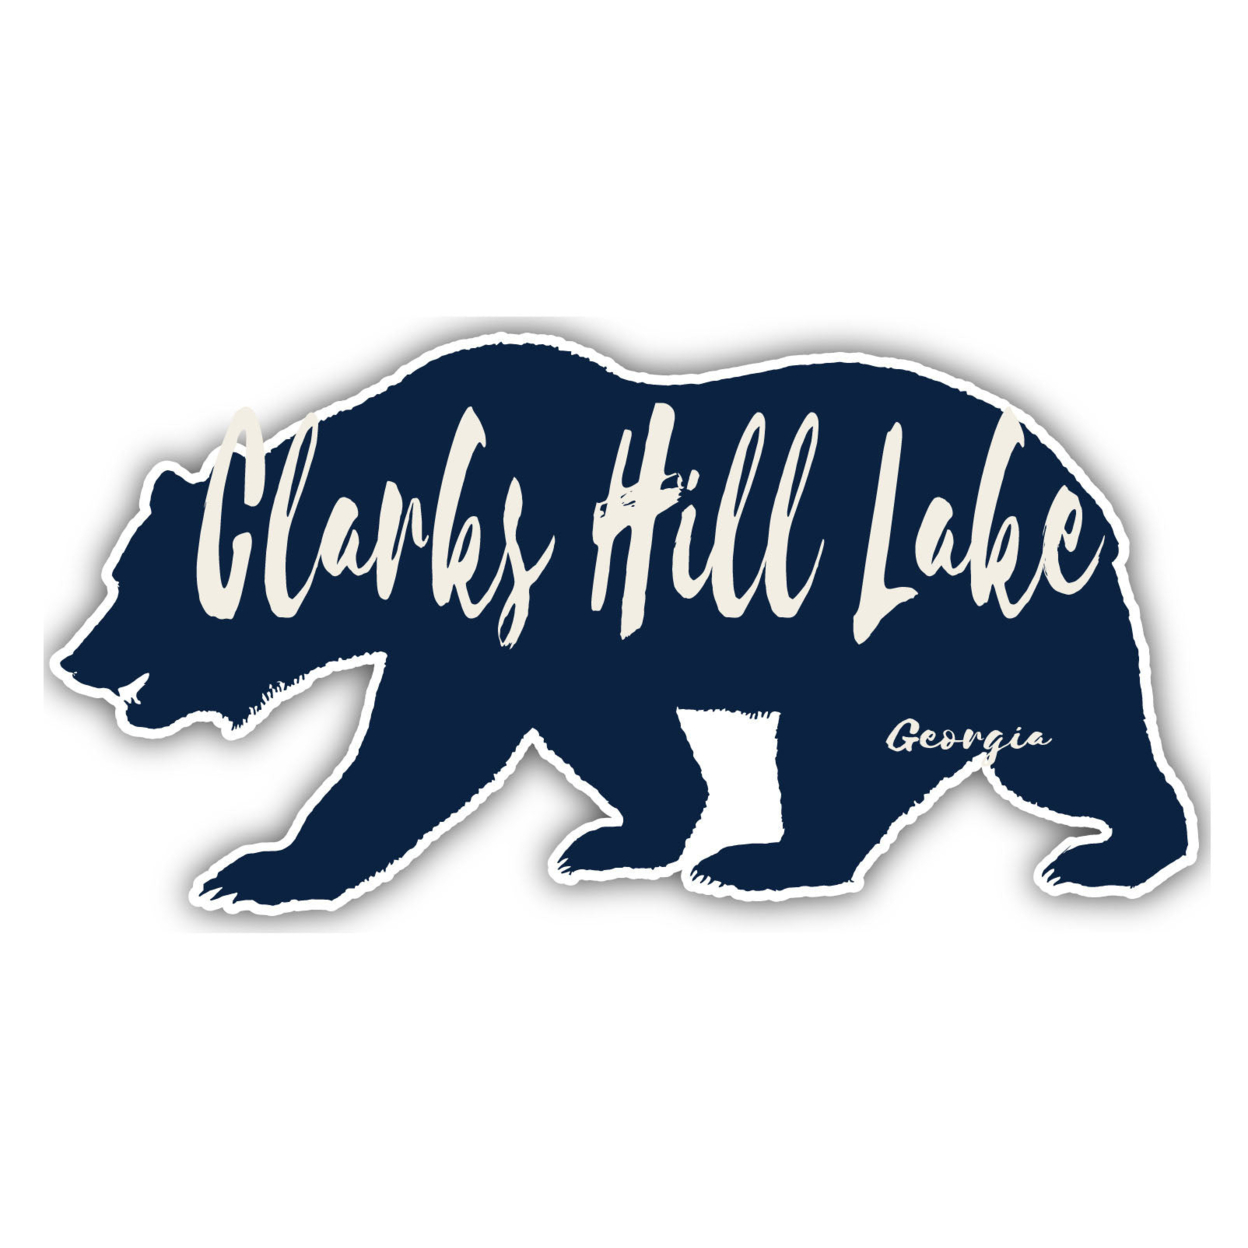 Clarks Hill Lake Georgia Souvenir Decorative Stickers (Choose Theme And Size) - 4-Pack, 4-Inch, Camp Life